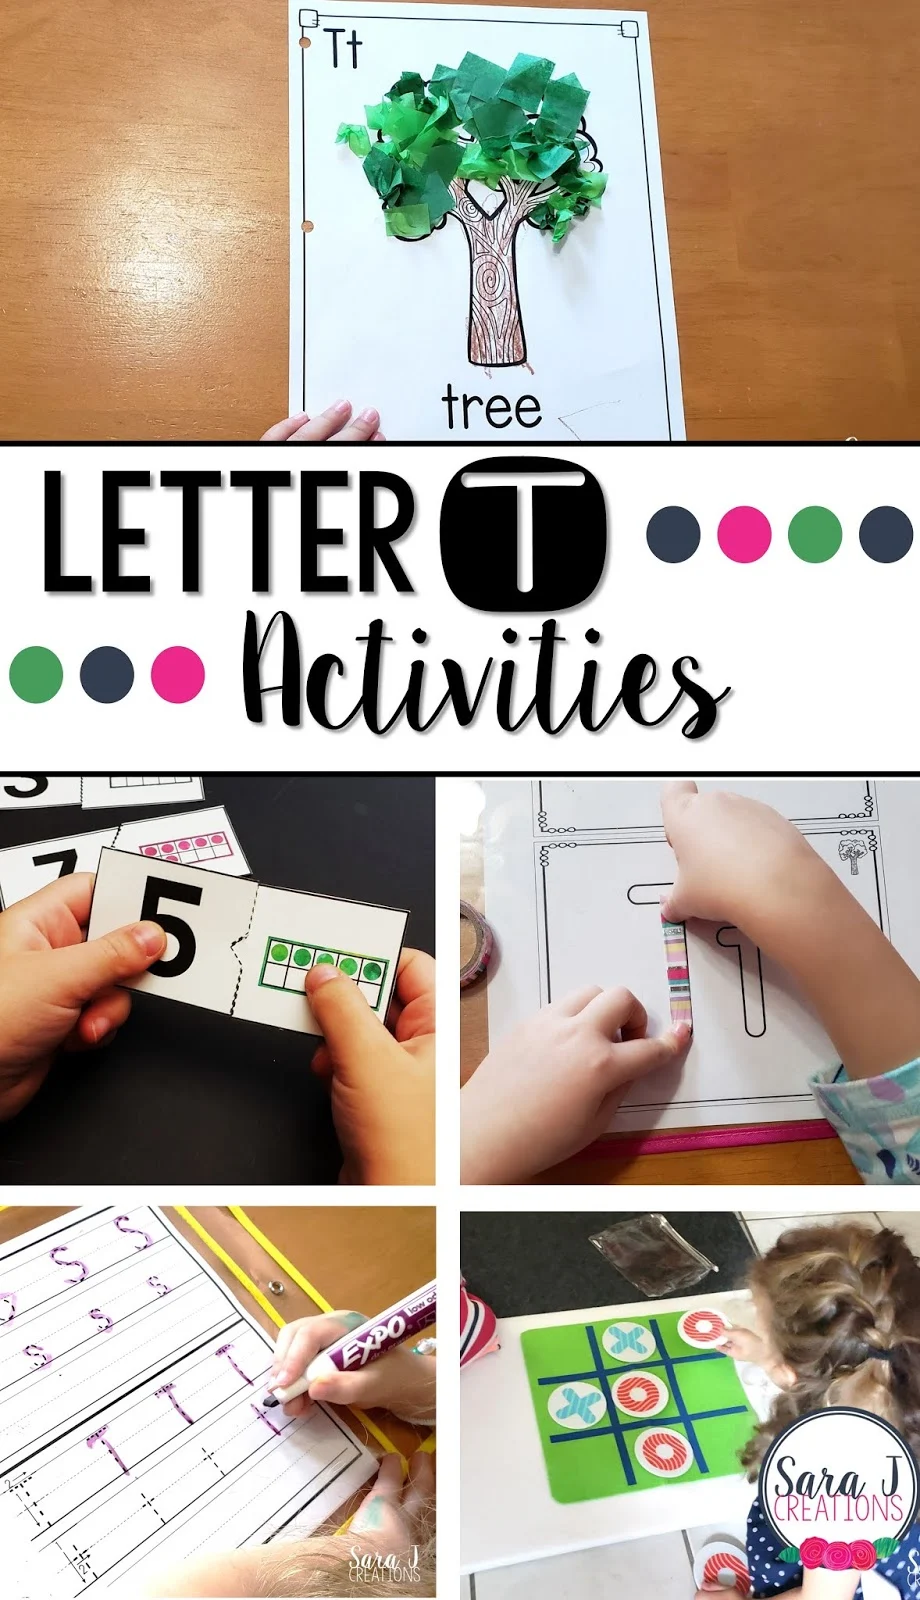 Join us as we practice the alphabet, specifically letter T, with fun activities for preschool aged kids. Art, crafts, fine motor, handwriting worksheets, books and more!